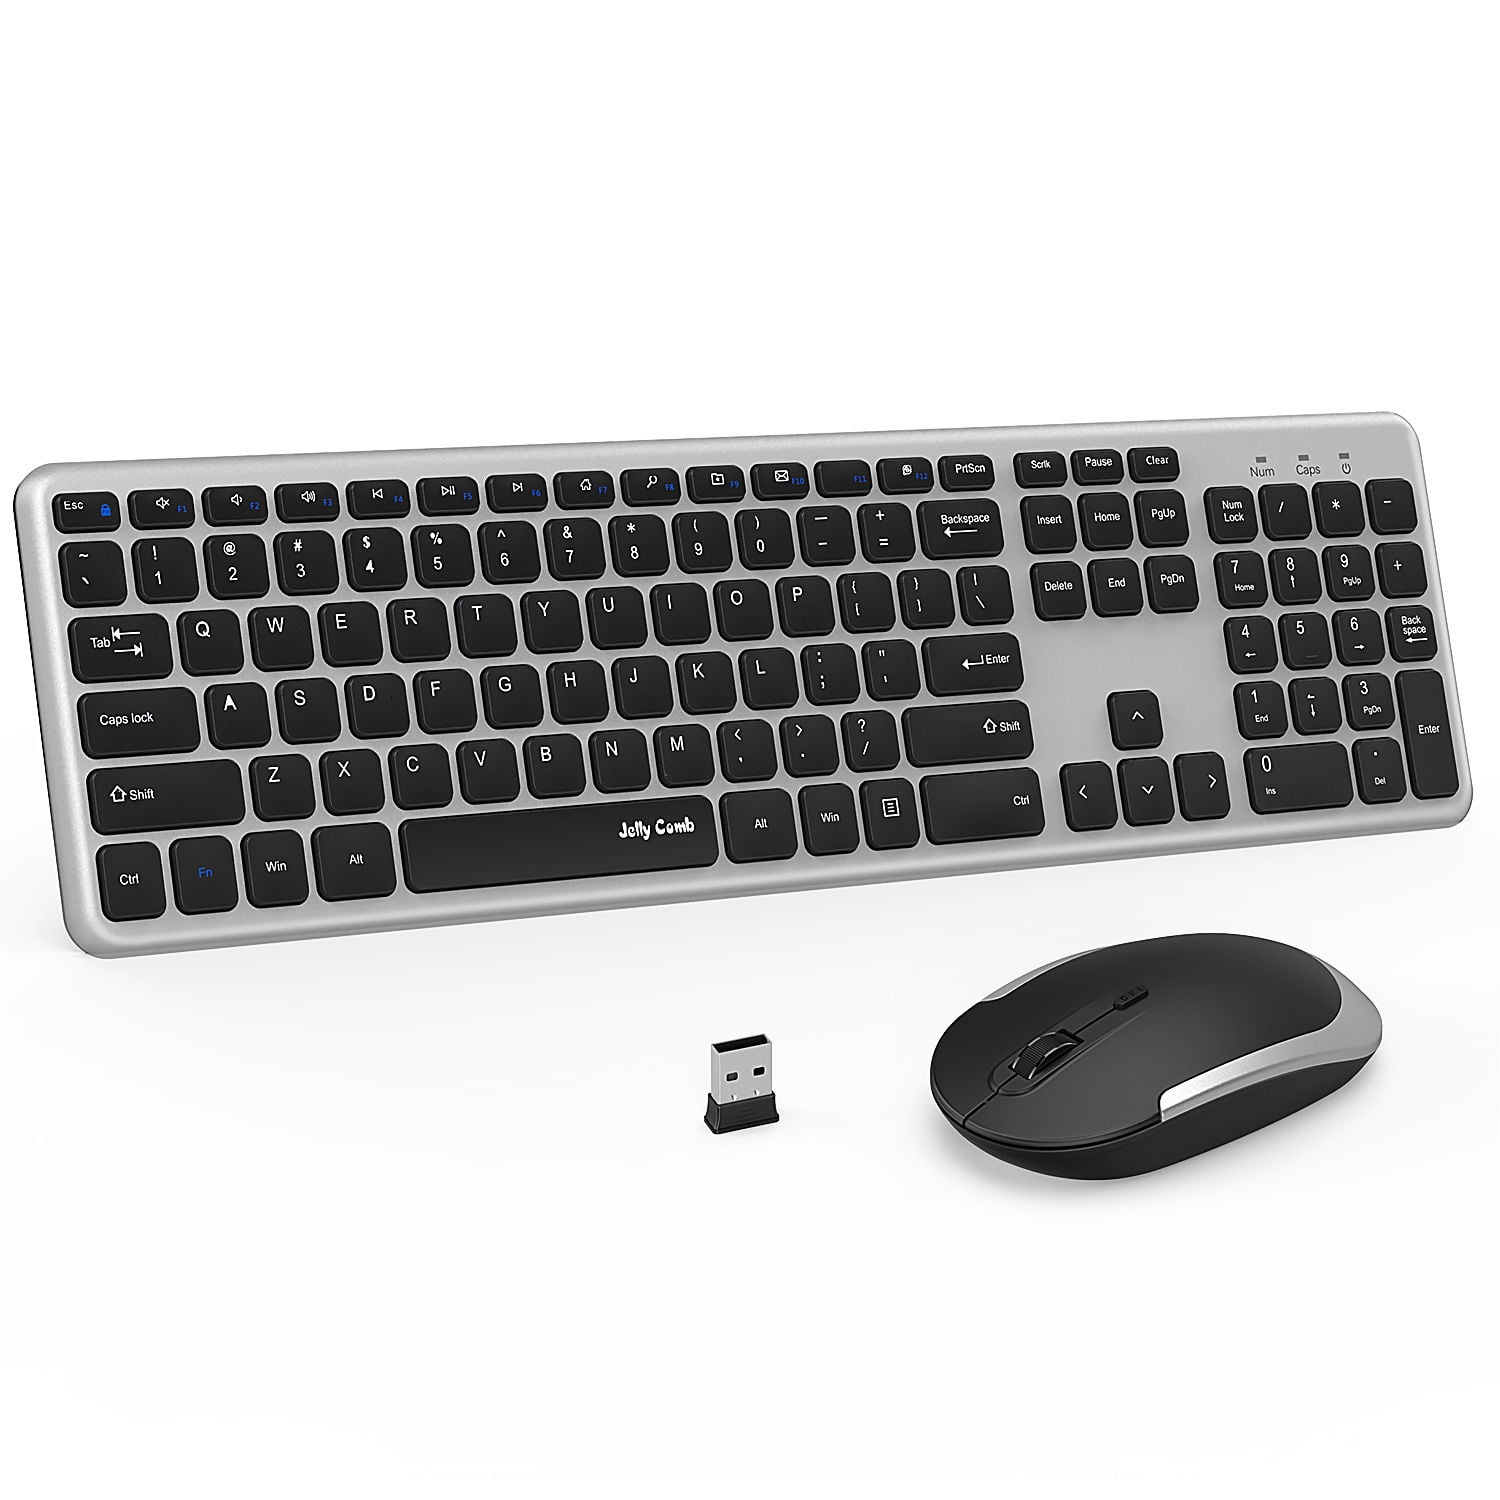 Jelly Comb 2.4G Ultra Slim Aluminum Rechargeable Wireless Keyboard Mouse Combo for Notebook Laptop Desktop PC Computer. White Keyboard and Mouse 